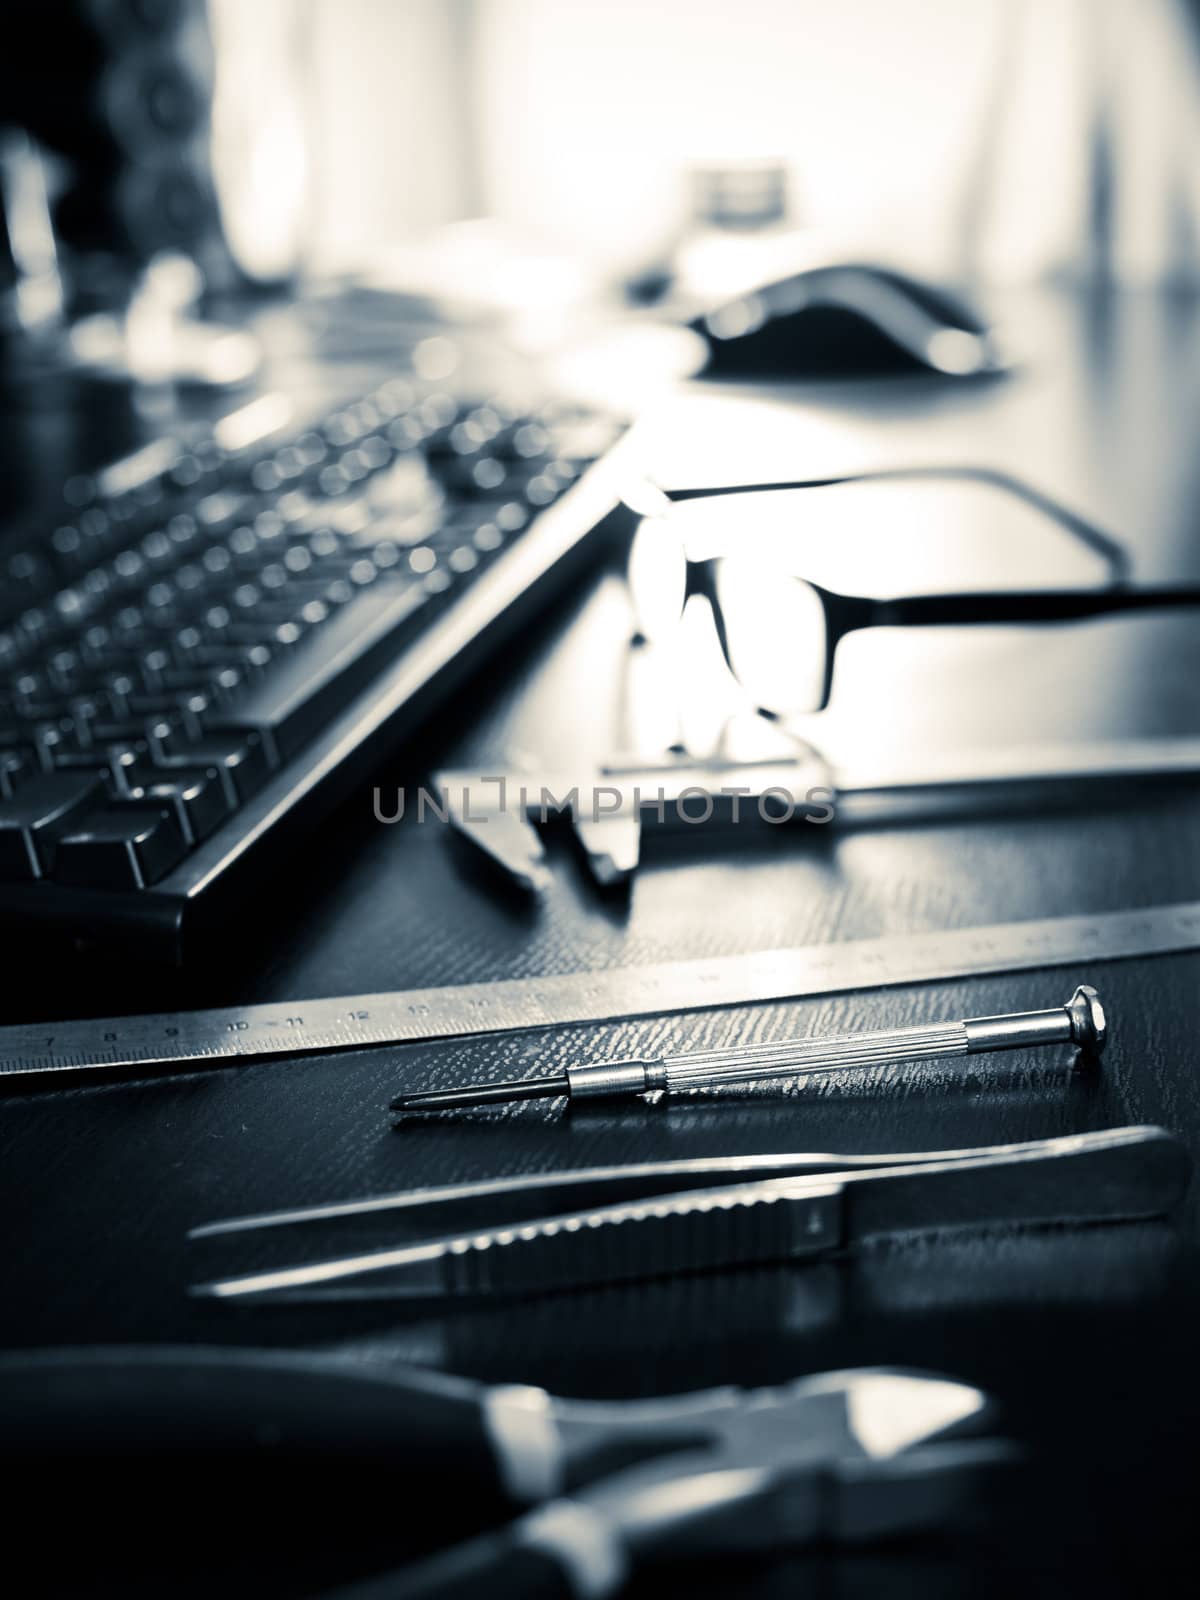 Tools on a table by naumoid